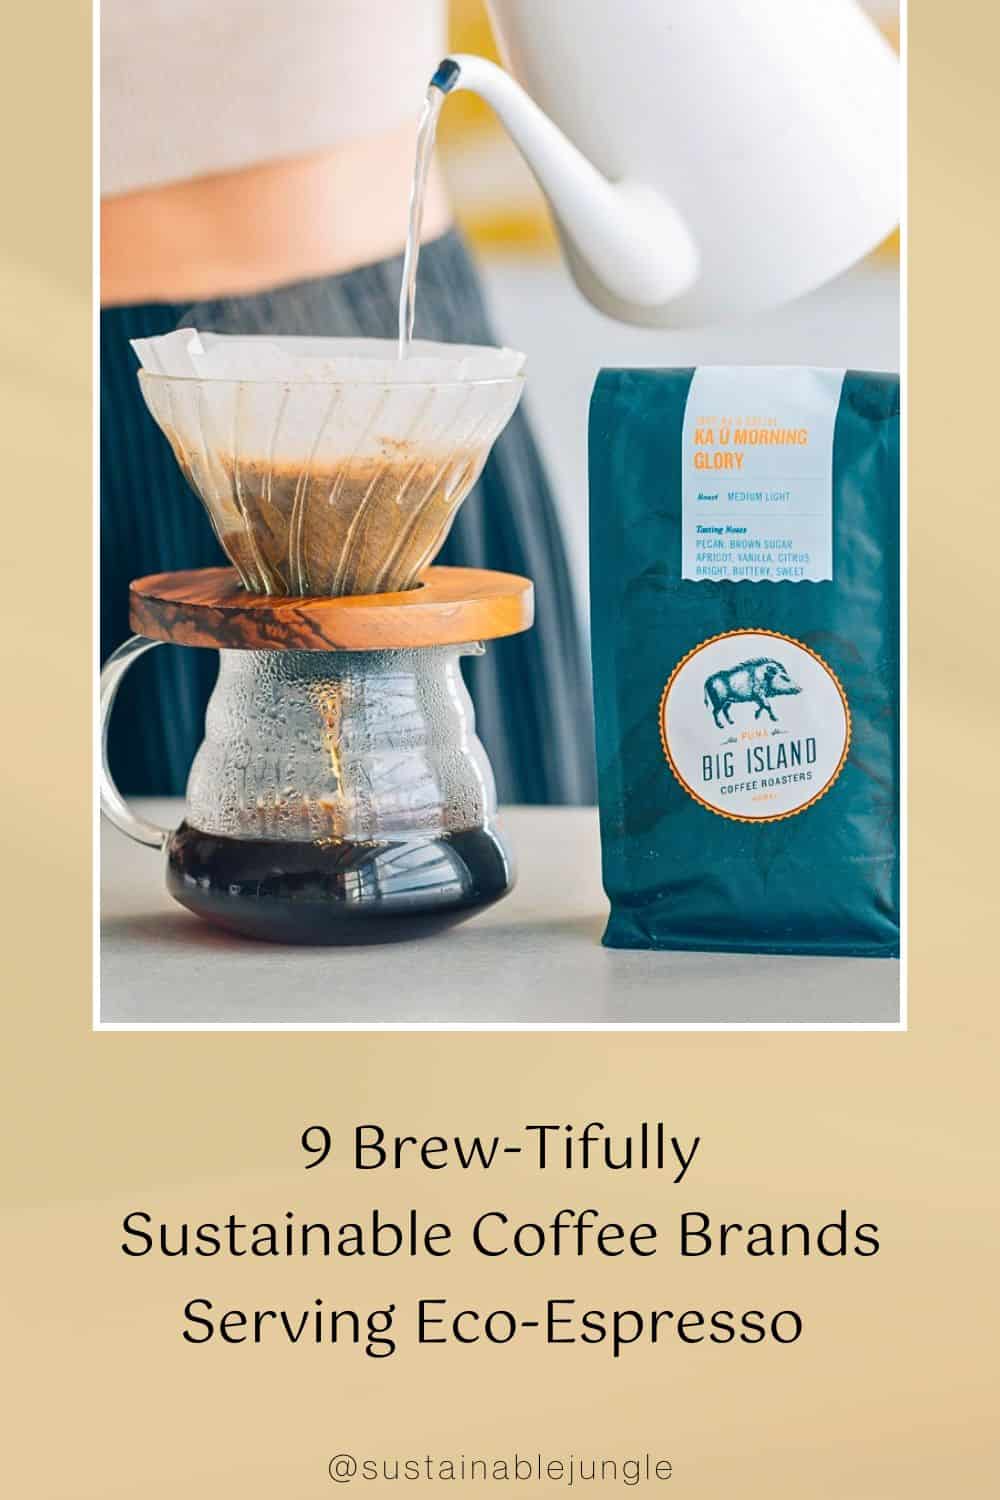 9 Brew-Tifully Sustainable Coffee Brands Serving Eco-Espresso Image by Big Island Coffee Roasters #sustainablecoffeebrands #sustaianblecoffeebeans #ethicalcoffeebrands #ecofriendlycoffee #ethicalcoffeecompanies #ethicalbeancoffee #sustainablejungle